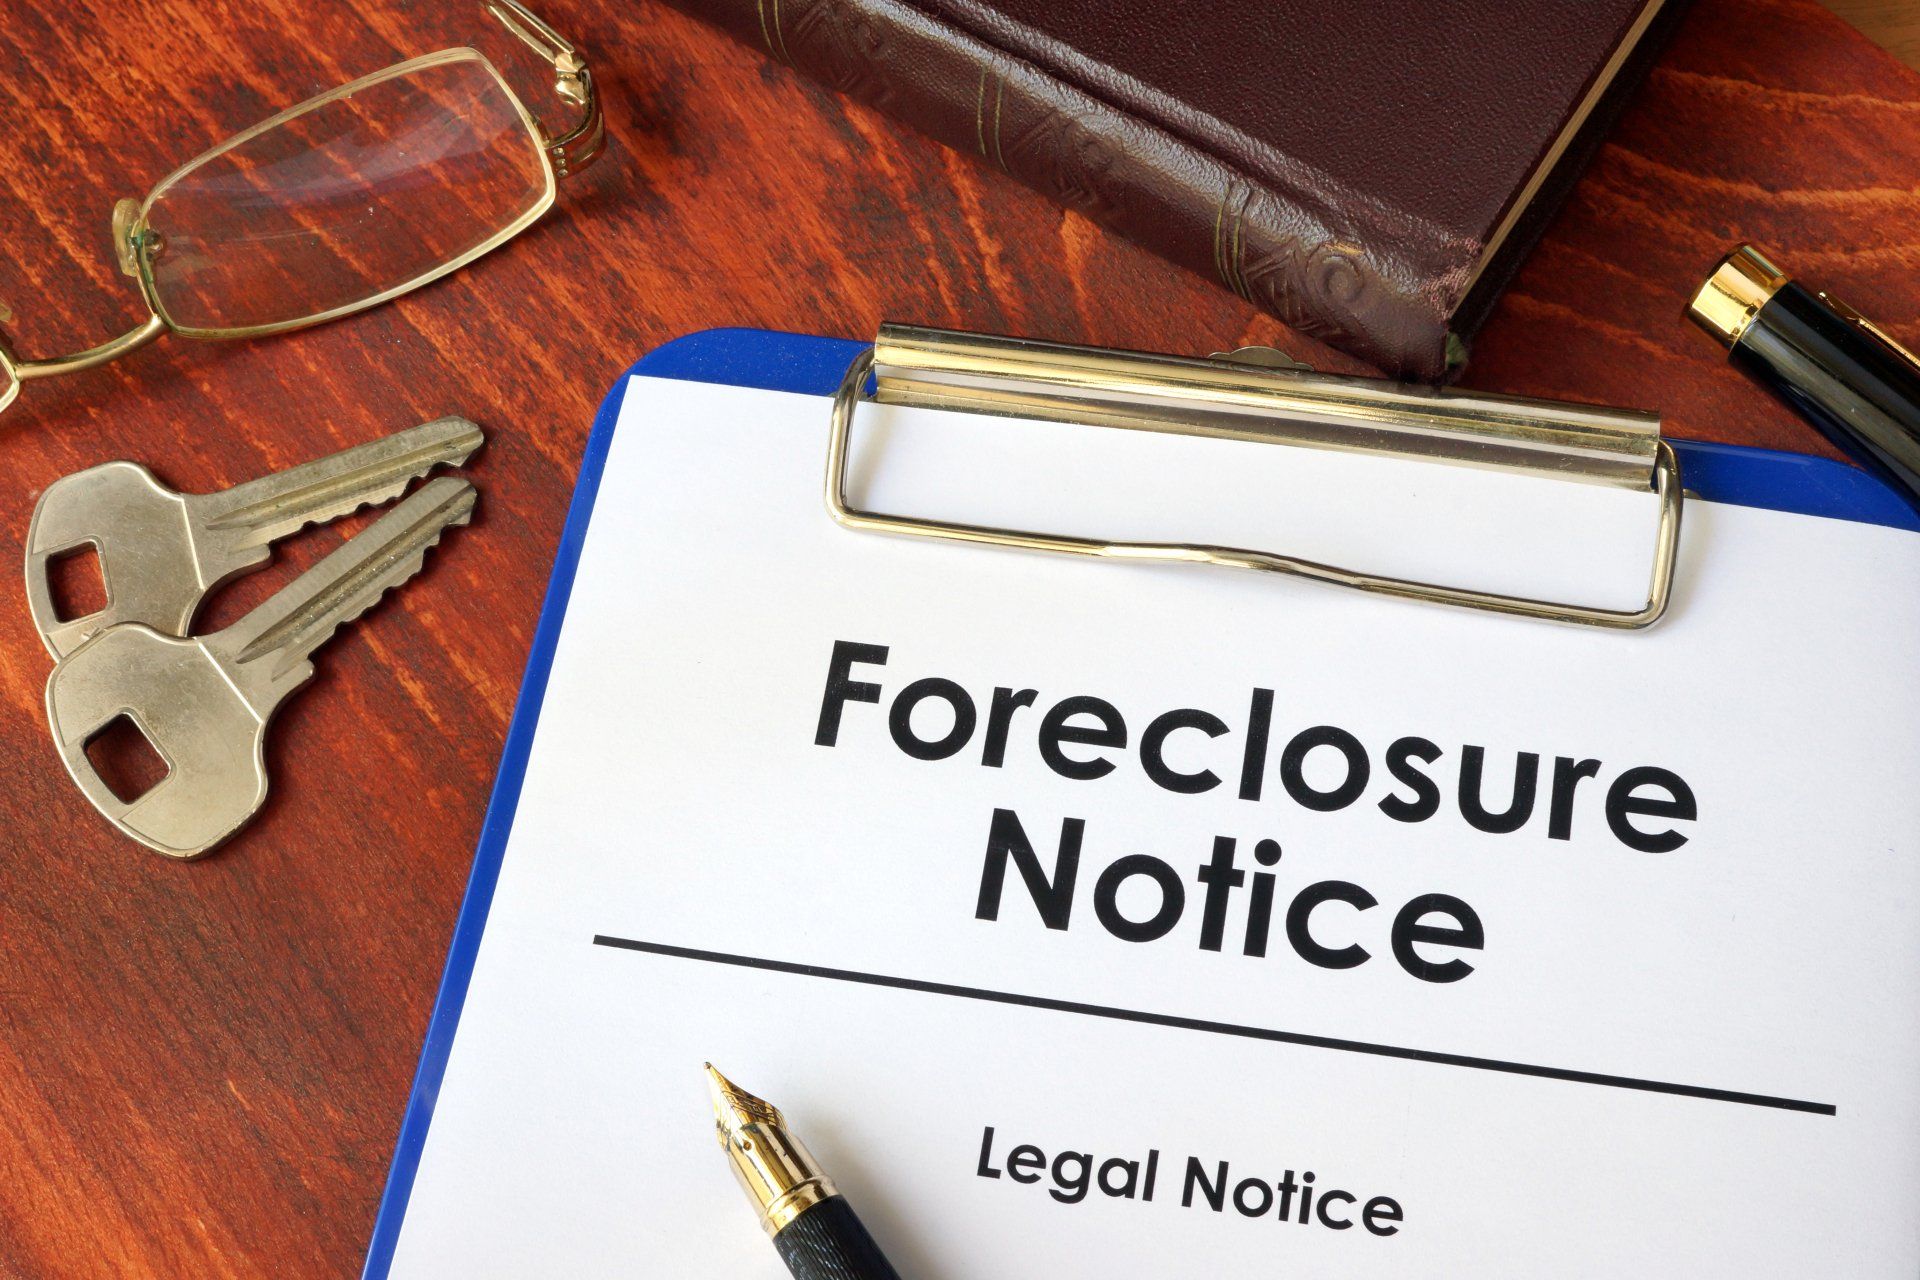 Is your home in preforeclosure? Let's talk so we can help you with this stressful situation.